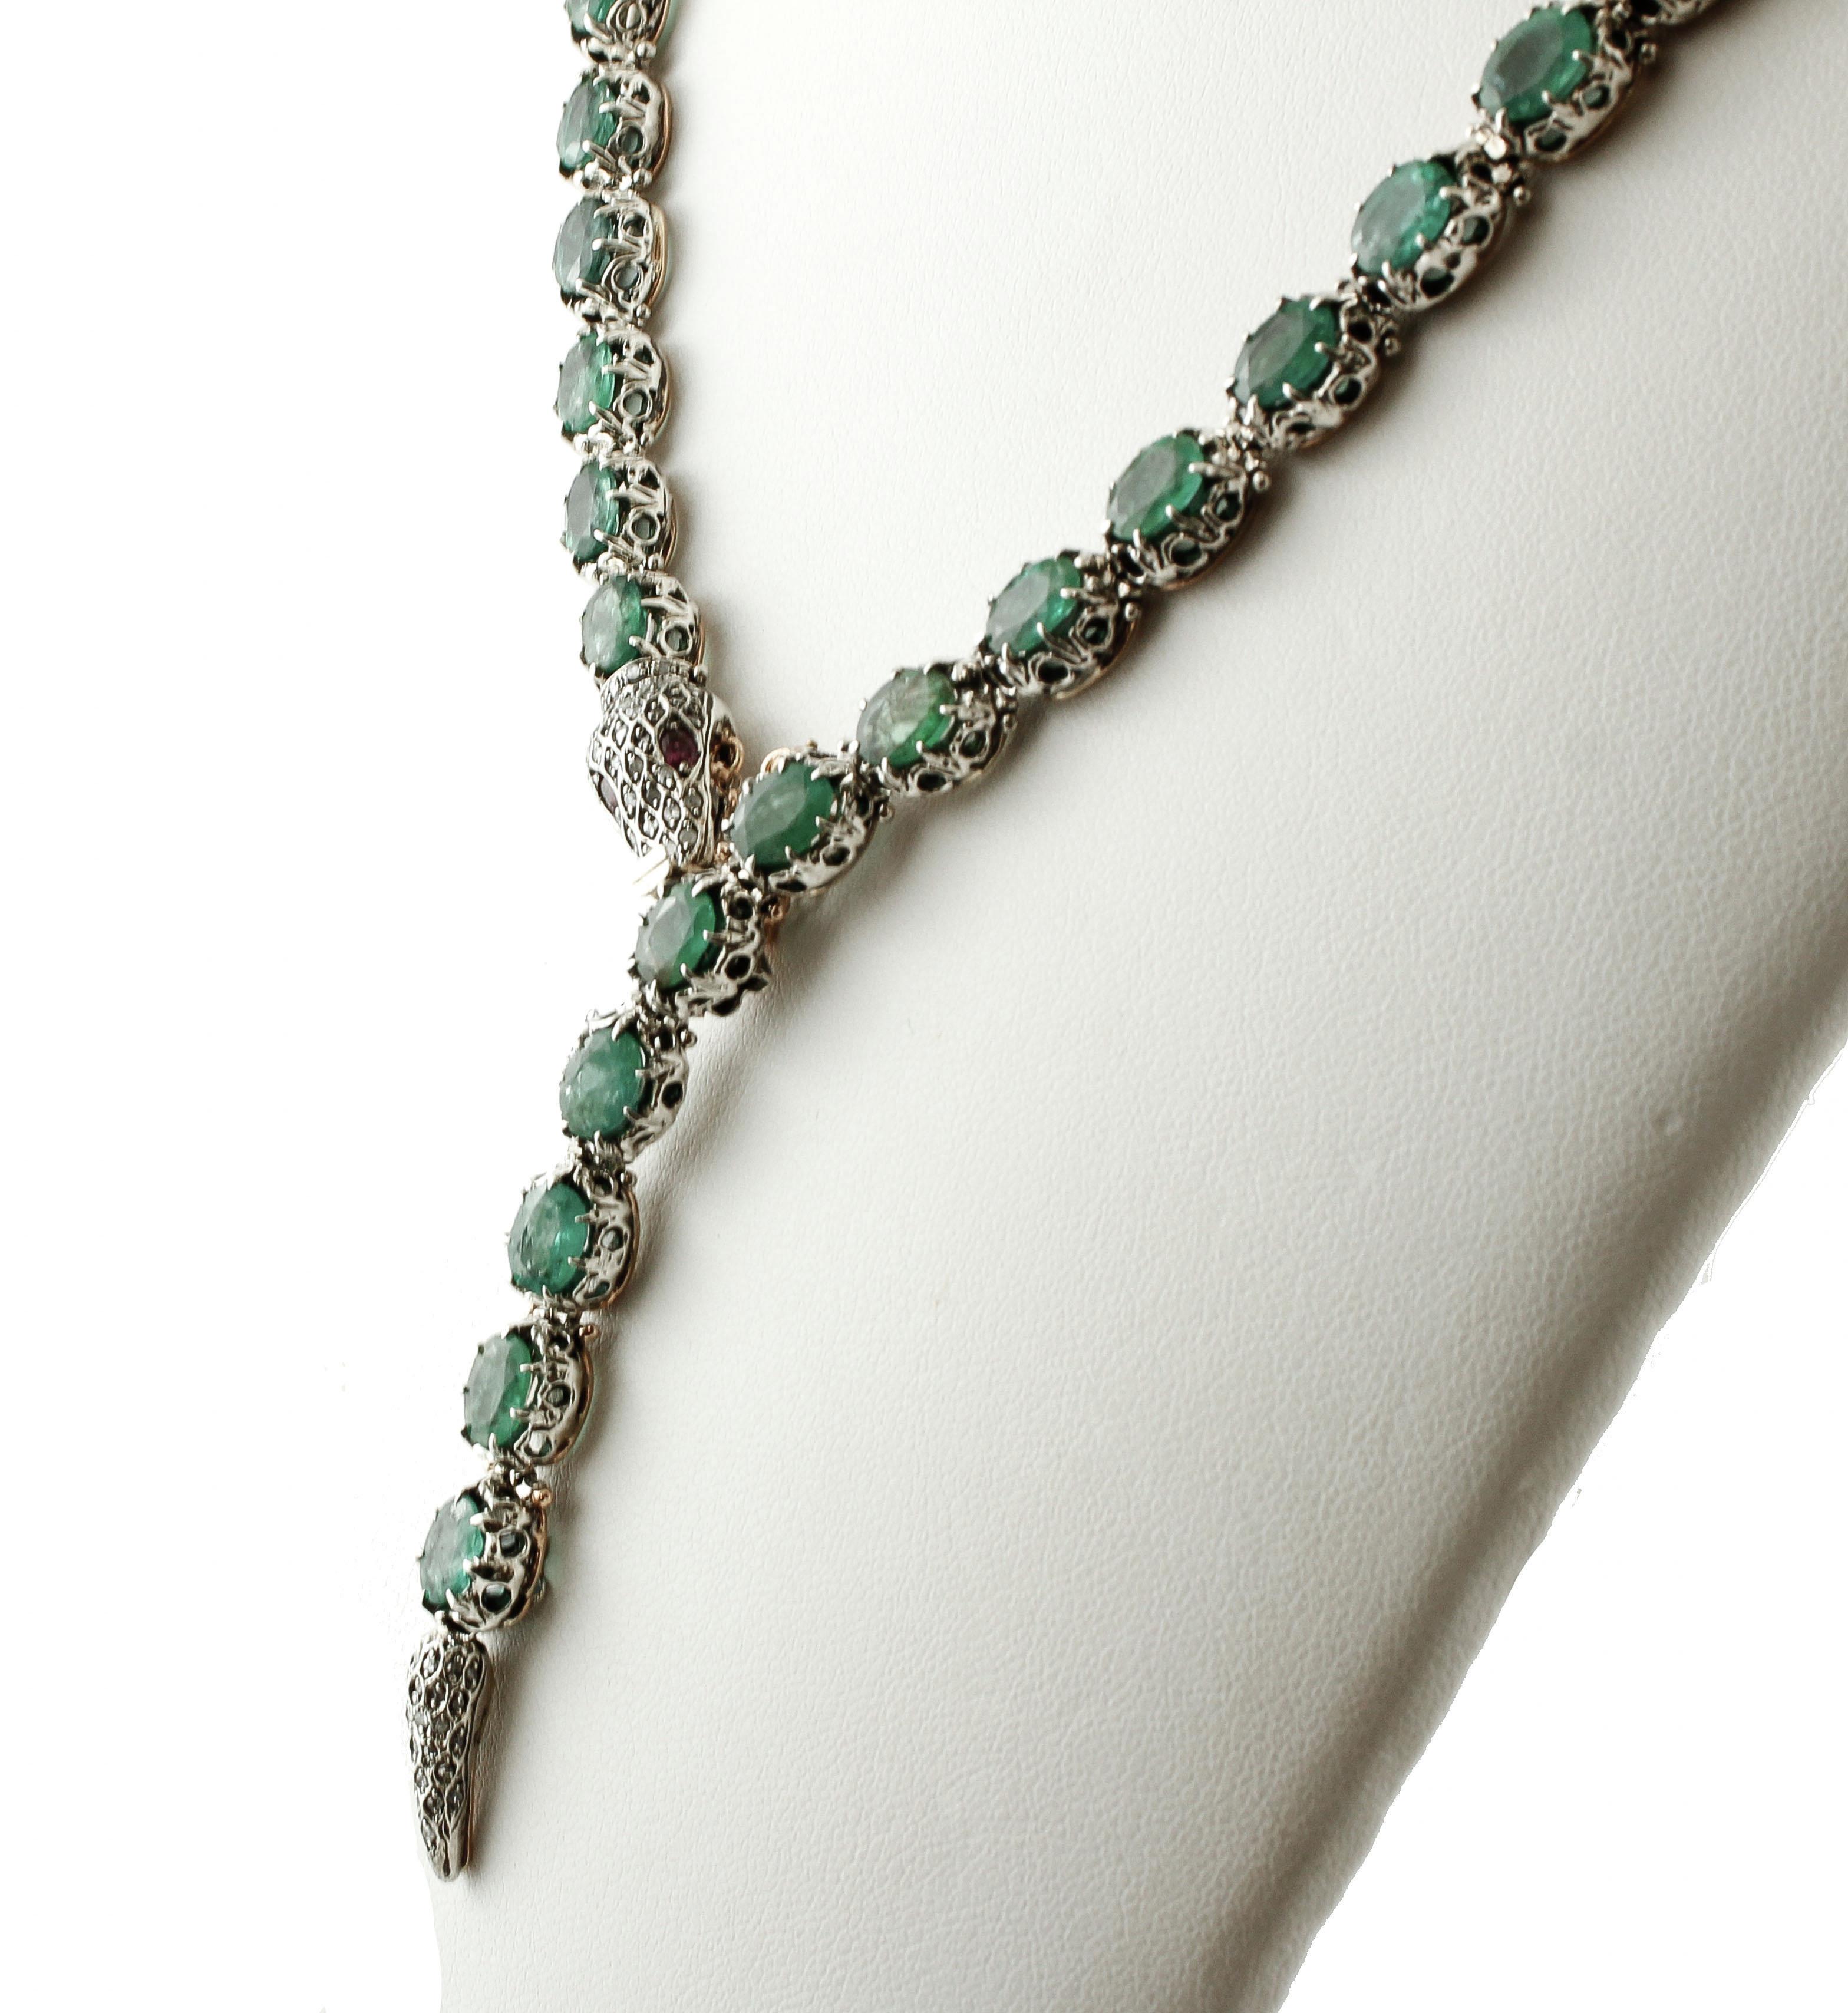 Marvelous retro snake necklace realized in 9k yellow gold and silver structure, and mounted with 62 intense emeralds along the snake body, 2 rubies as eyes, and little diamonds on the snake head and tail. 
This special necklace is totally handmade